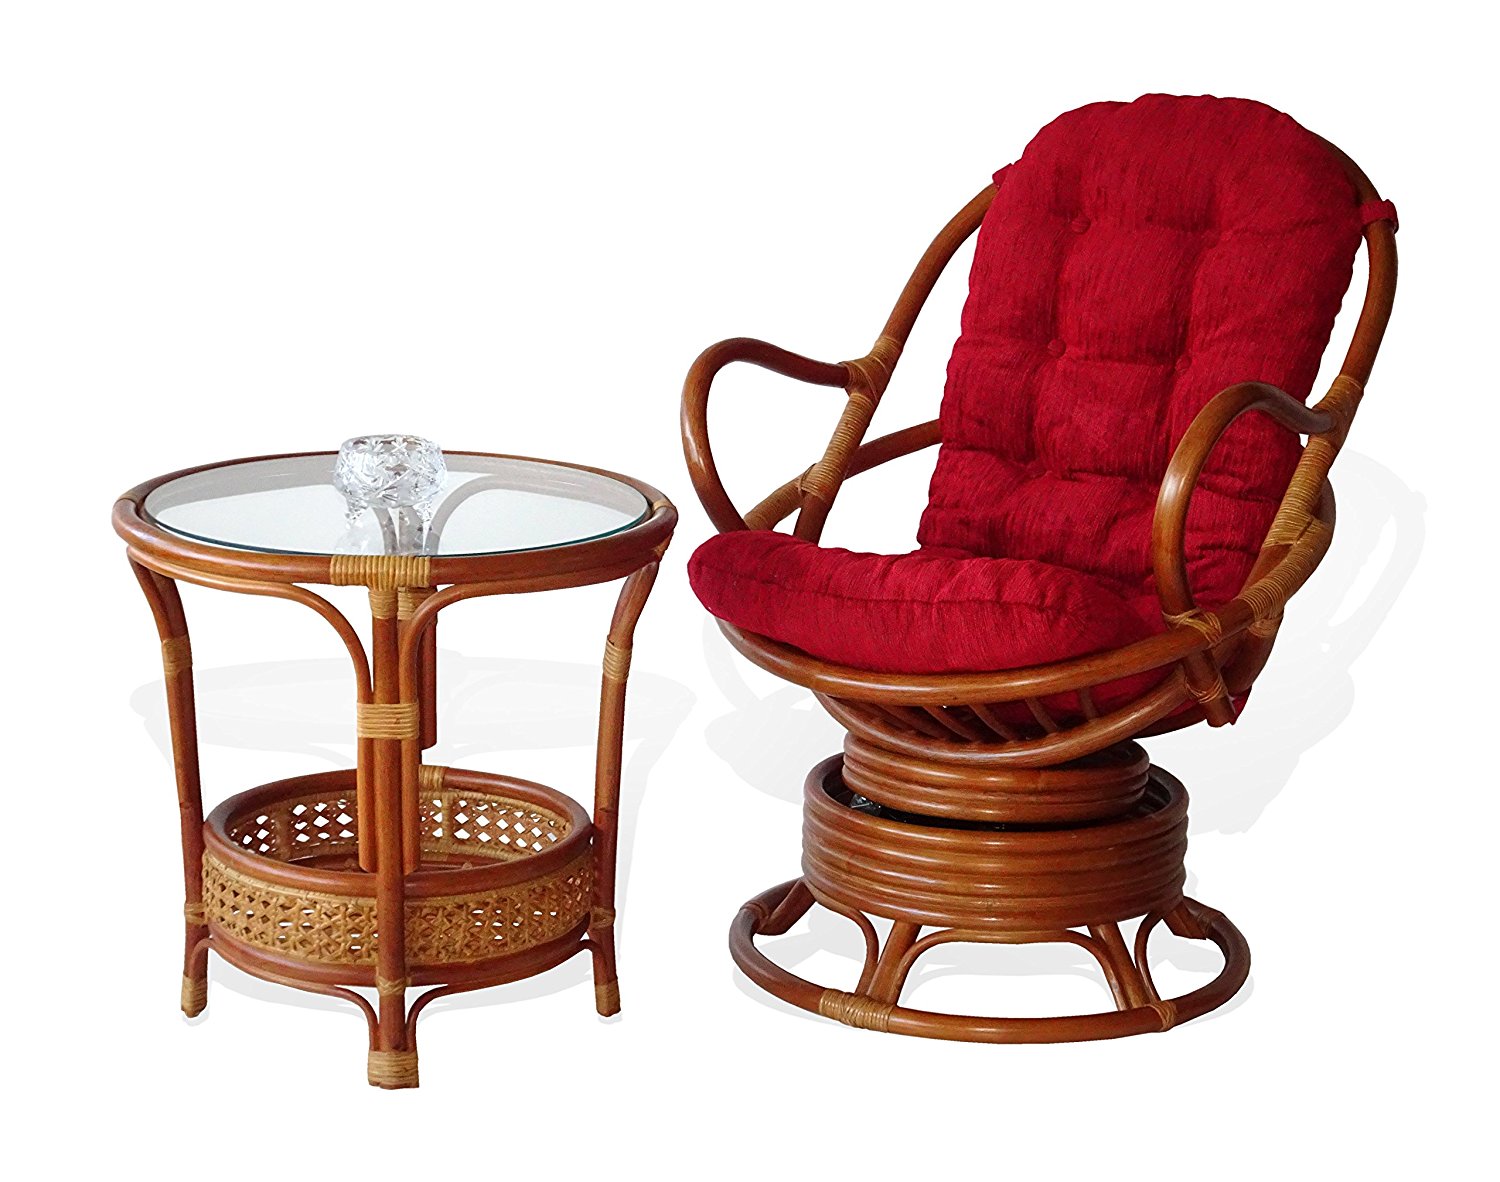 SK New Interiors Set of Swivel Rocking Java Lounge Chair Natural Rattan Wicker Handmade w/Burgundy Cushion and Round Coffee Table w/Glass, Colonial - image 1 of 7